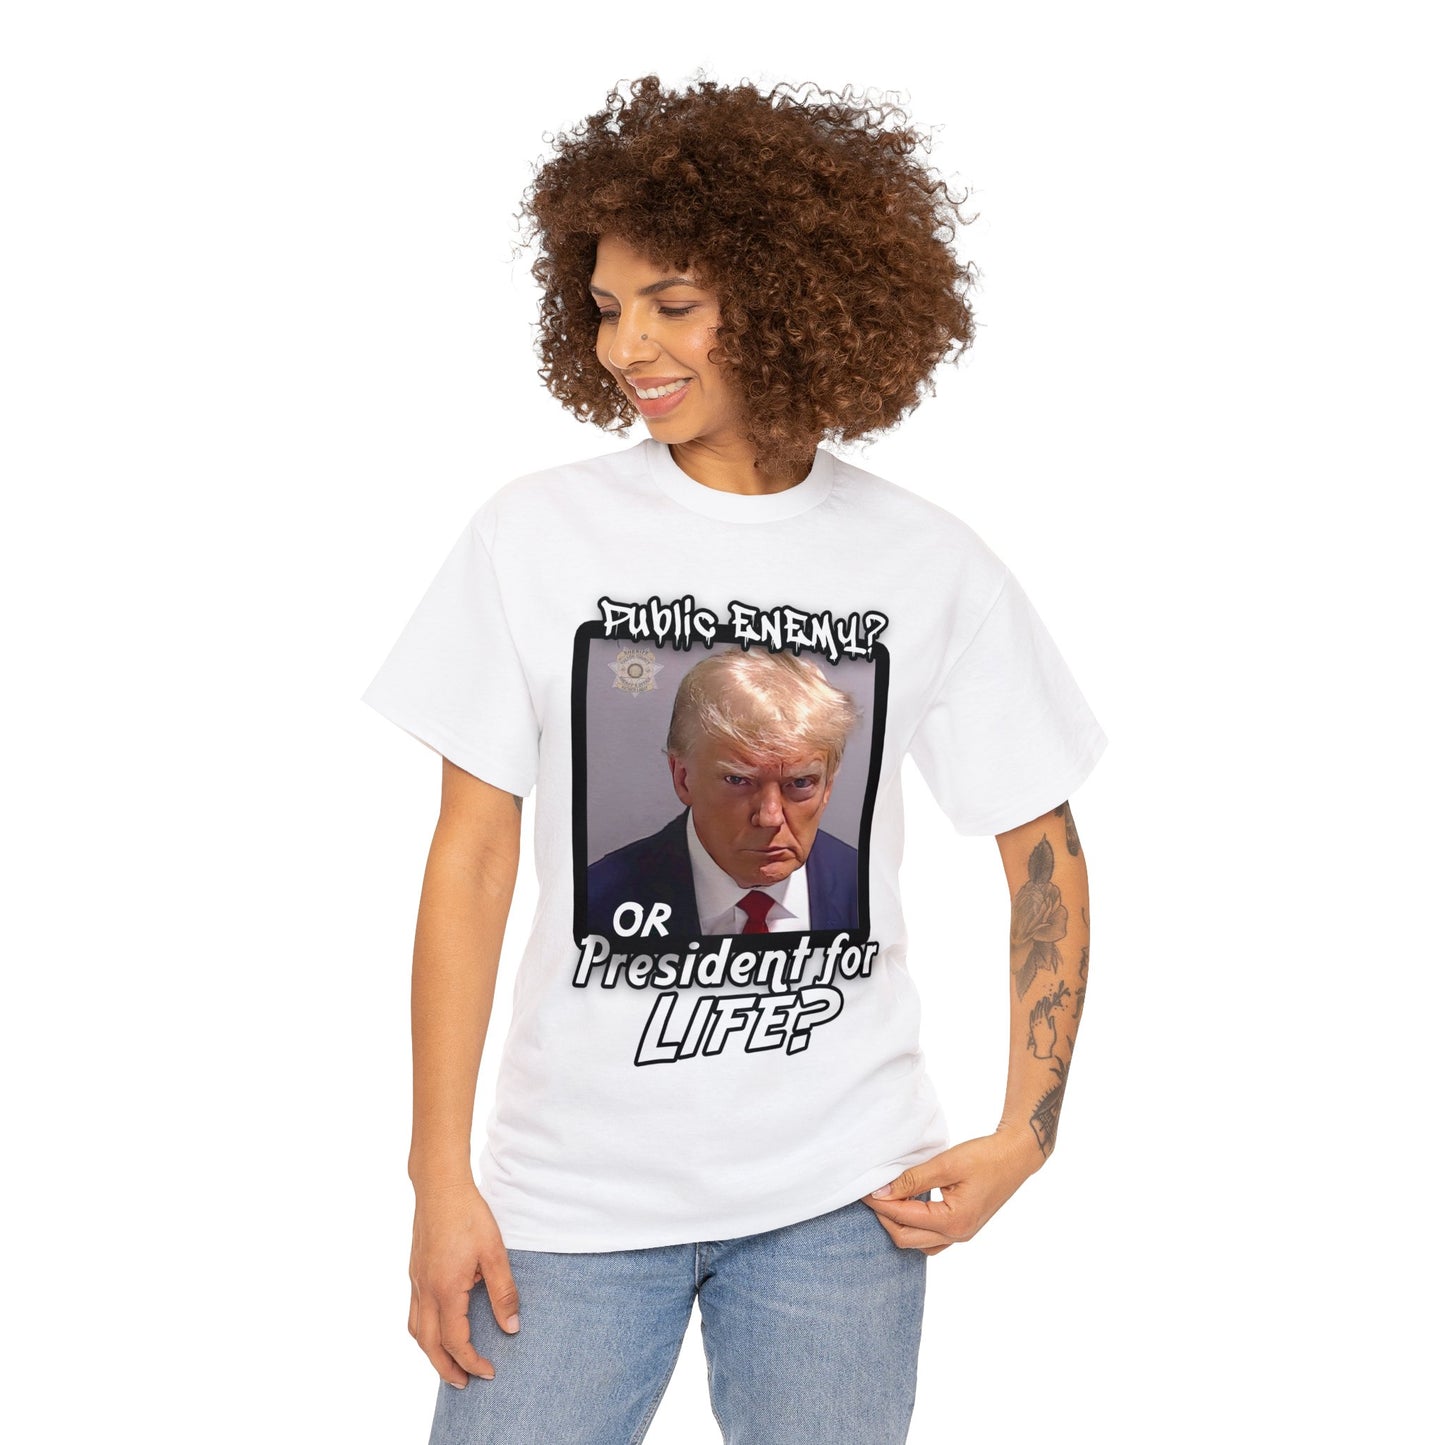 TRUMP POSITIVE T-SHIRT: Mugshot design #1: Public Enemy or President for Life?  - Unisex Heavy Cotton Tee - Express delivery available